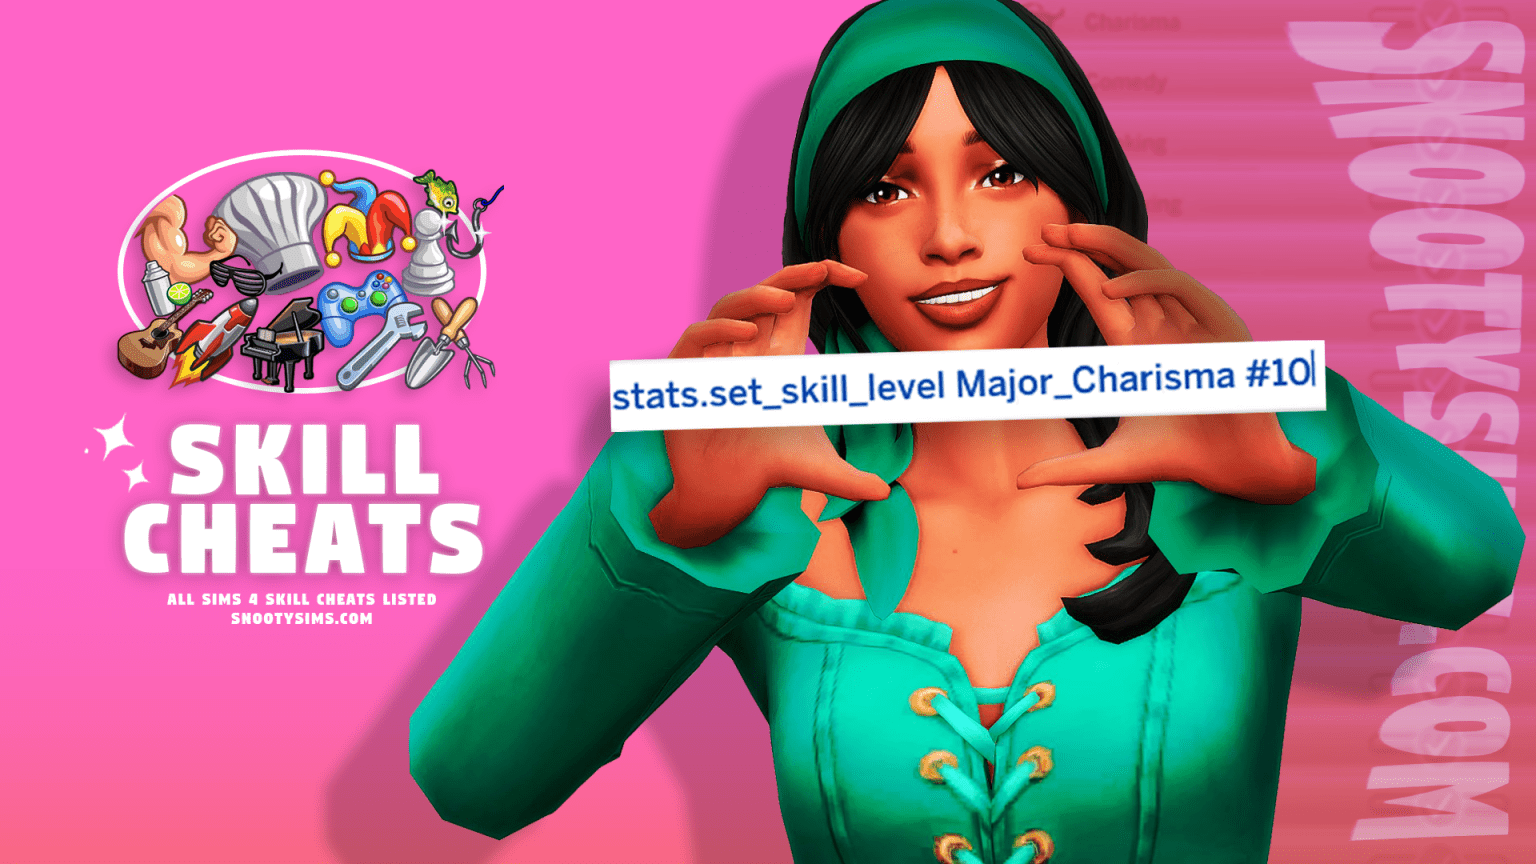 All Sims 4 Skills Cheats Listed Unlock Skills To Pay The Bills — Snootysims